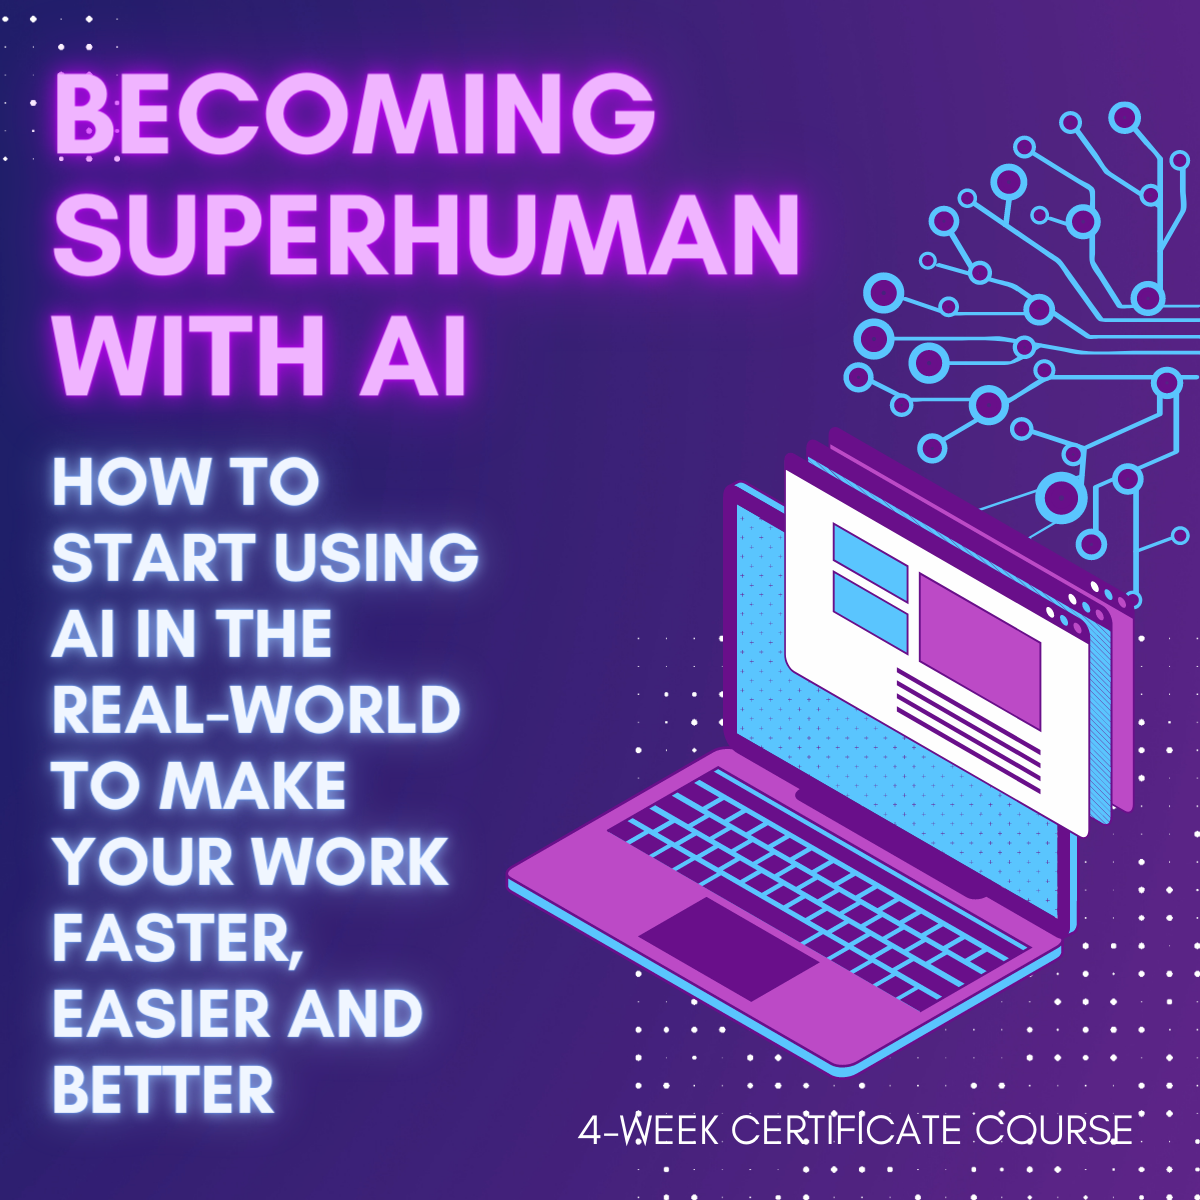 Becoming Superhuman With AI: How To Start Using AI In The Real-World To Make Your Work Faster, Easier And Better [JUNE 10TH]